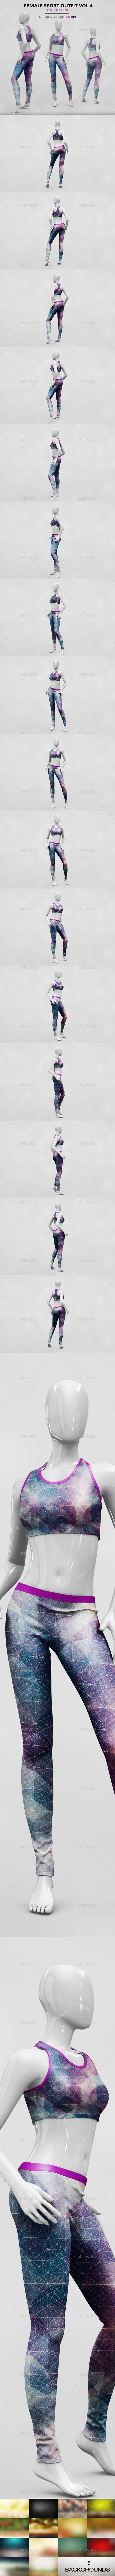 GraphicRiver Female Sport Outfit VOL.4 MockUp 20884334